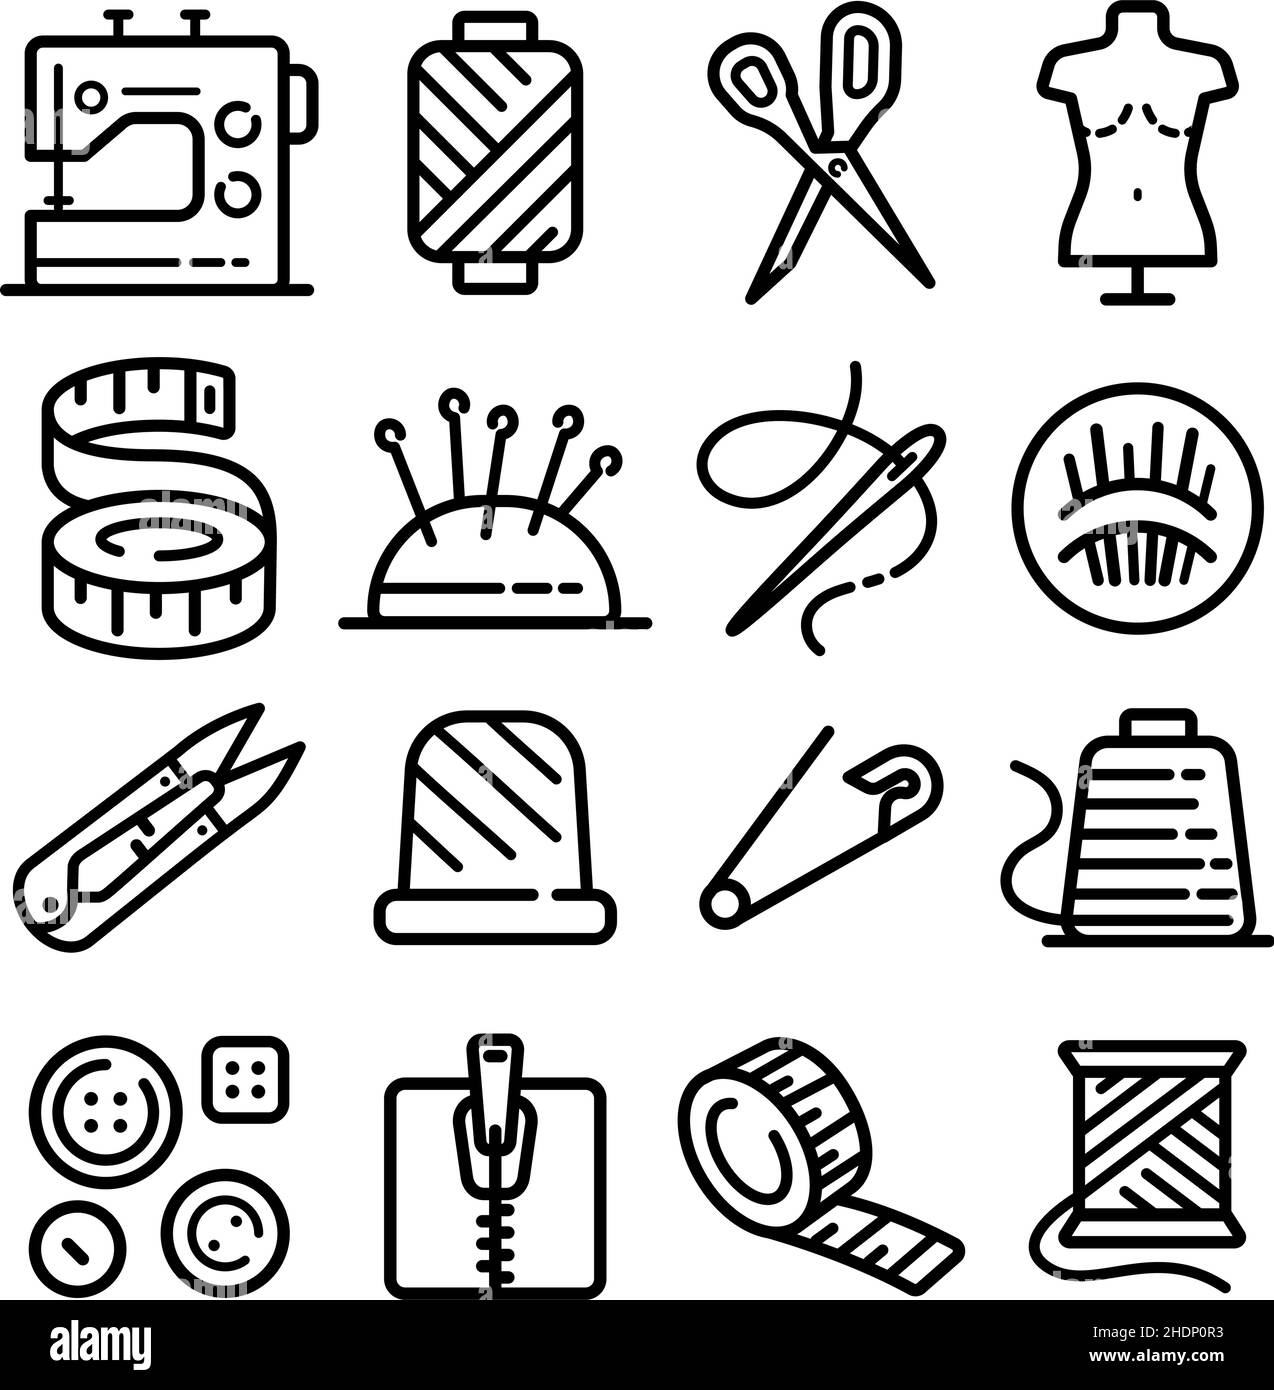 Sewing Tools And Accessories For Sewing Colored Threads, Coils, Scissors,  Buttons, Needles, Pin And Tailor Meter On A White Background Concept Of Sewing  Accessories. Stock Photo, Picture and Royalty Free Image. Image